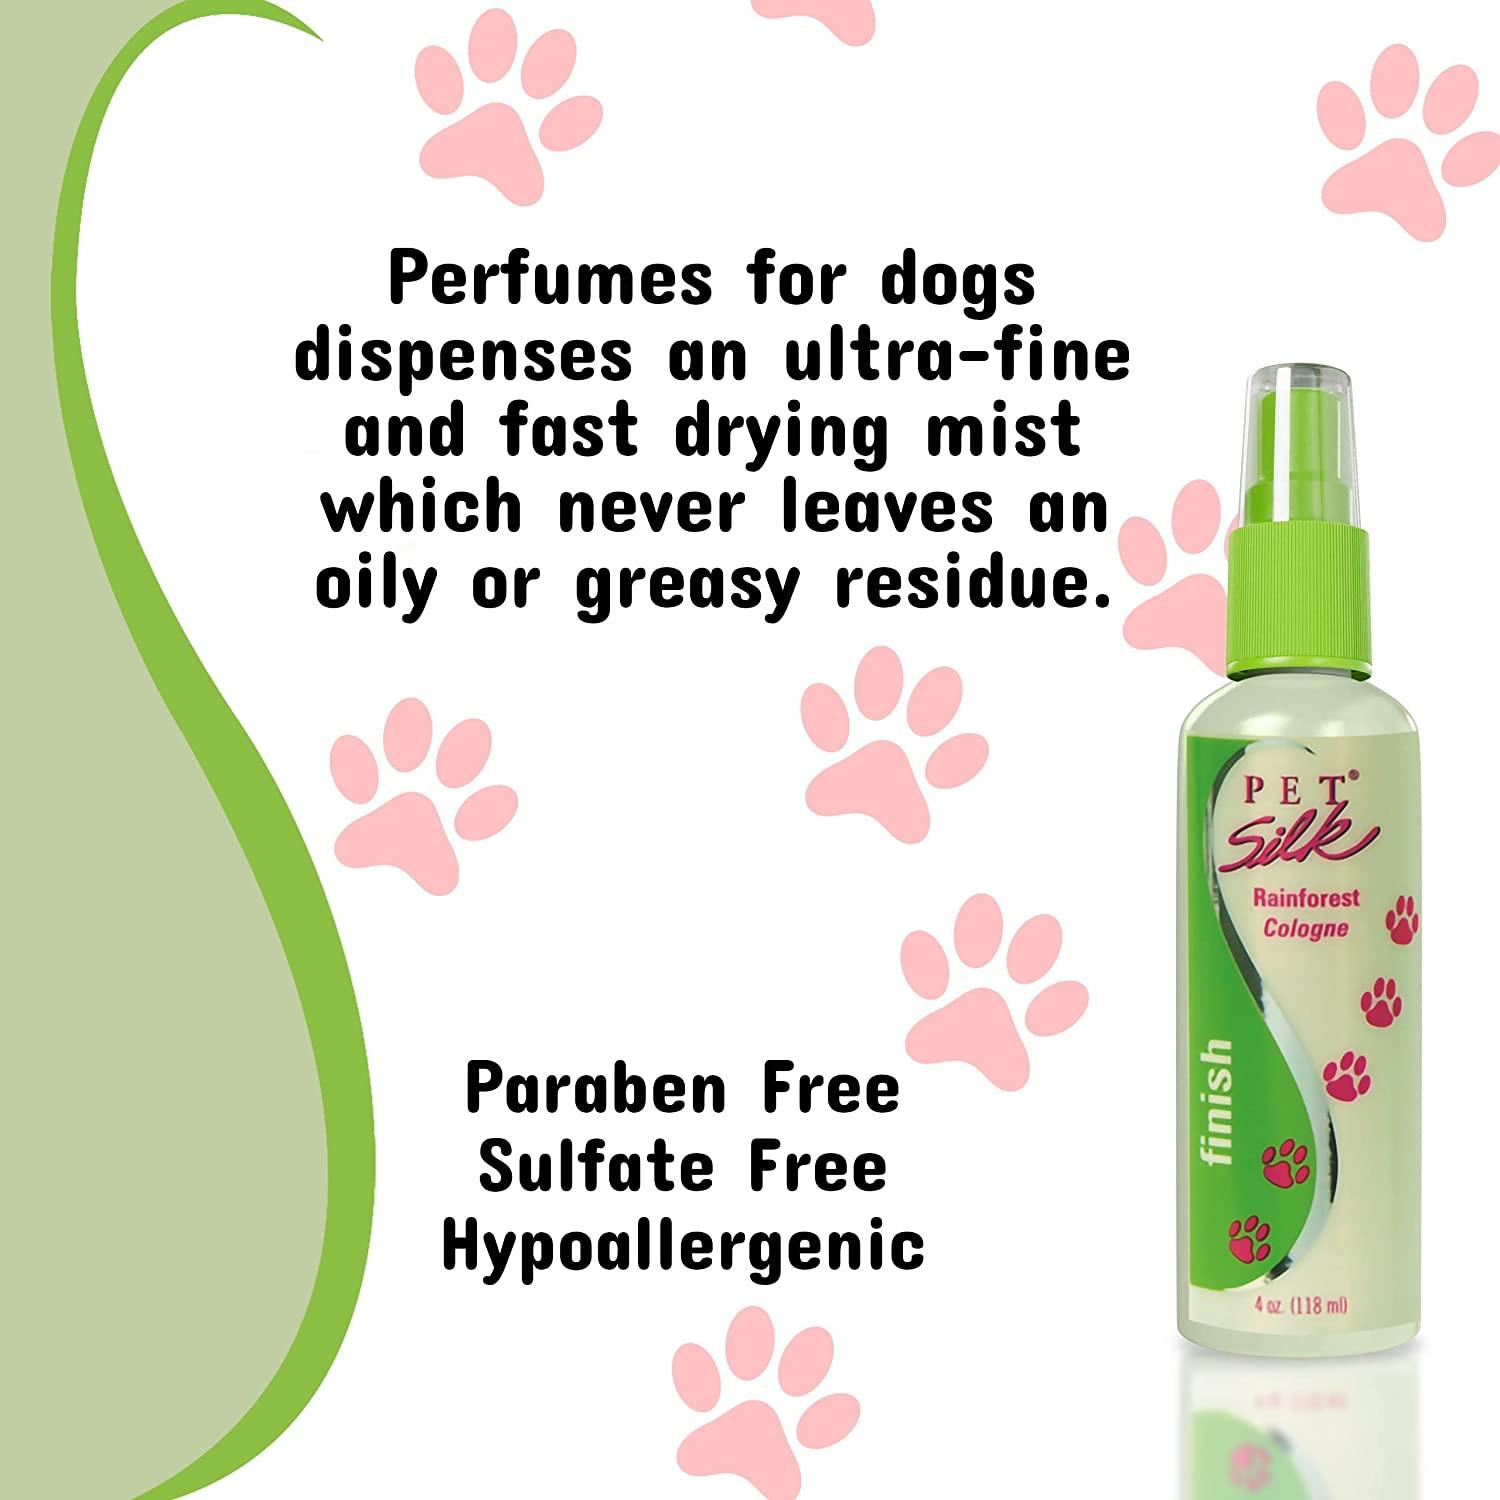 zuigen atmosfeer erosie Pet Silk Rainforest Cologne (11.6 oz) - Dog Deodorant Perfume Body Spray  with Conditioning & Deodorizing Qualities Clean & Fresh Fragrance Pet  Grooming Perfume for Cats Rainforest 11.6 Fl Oz (Pack of 1)